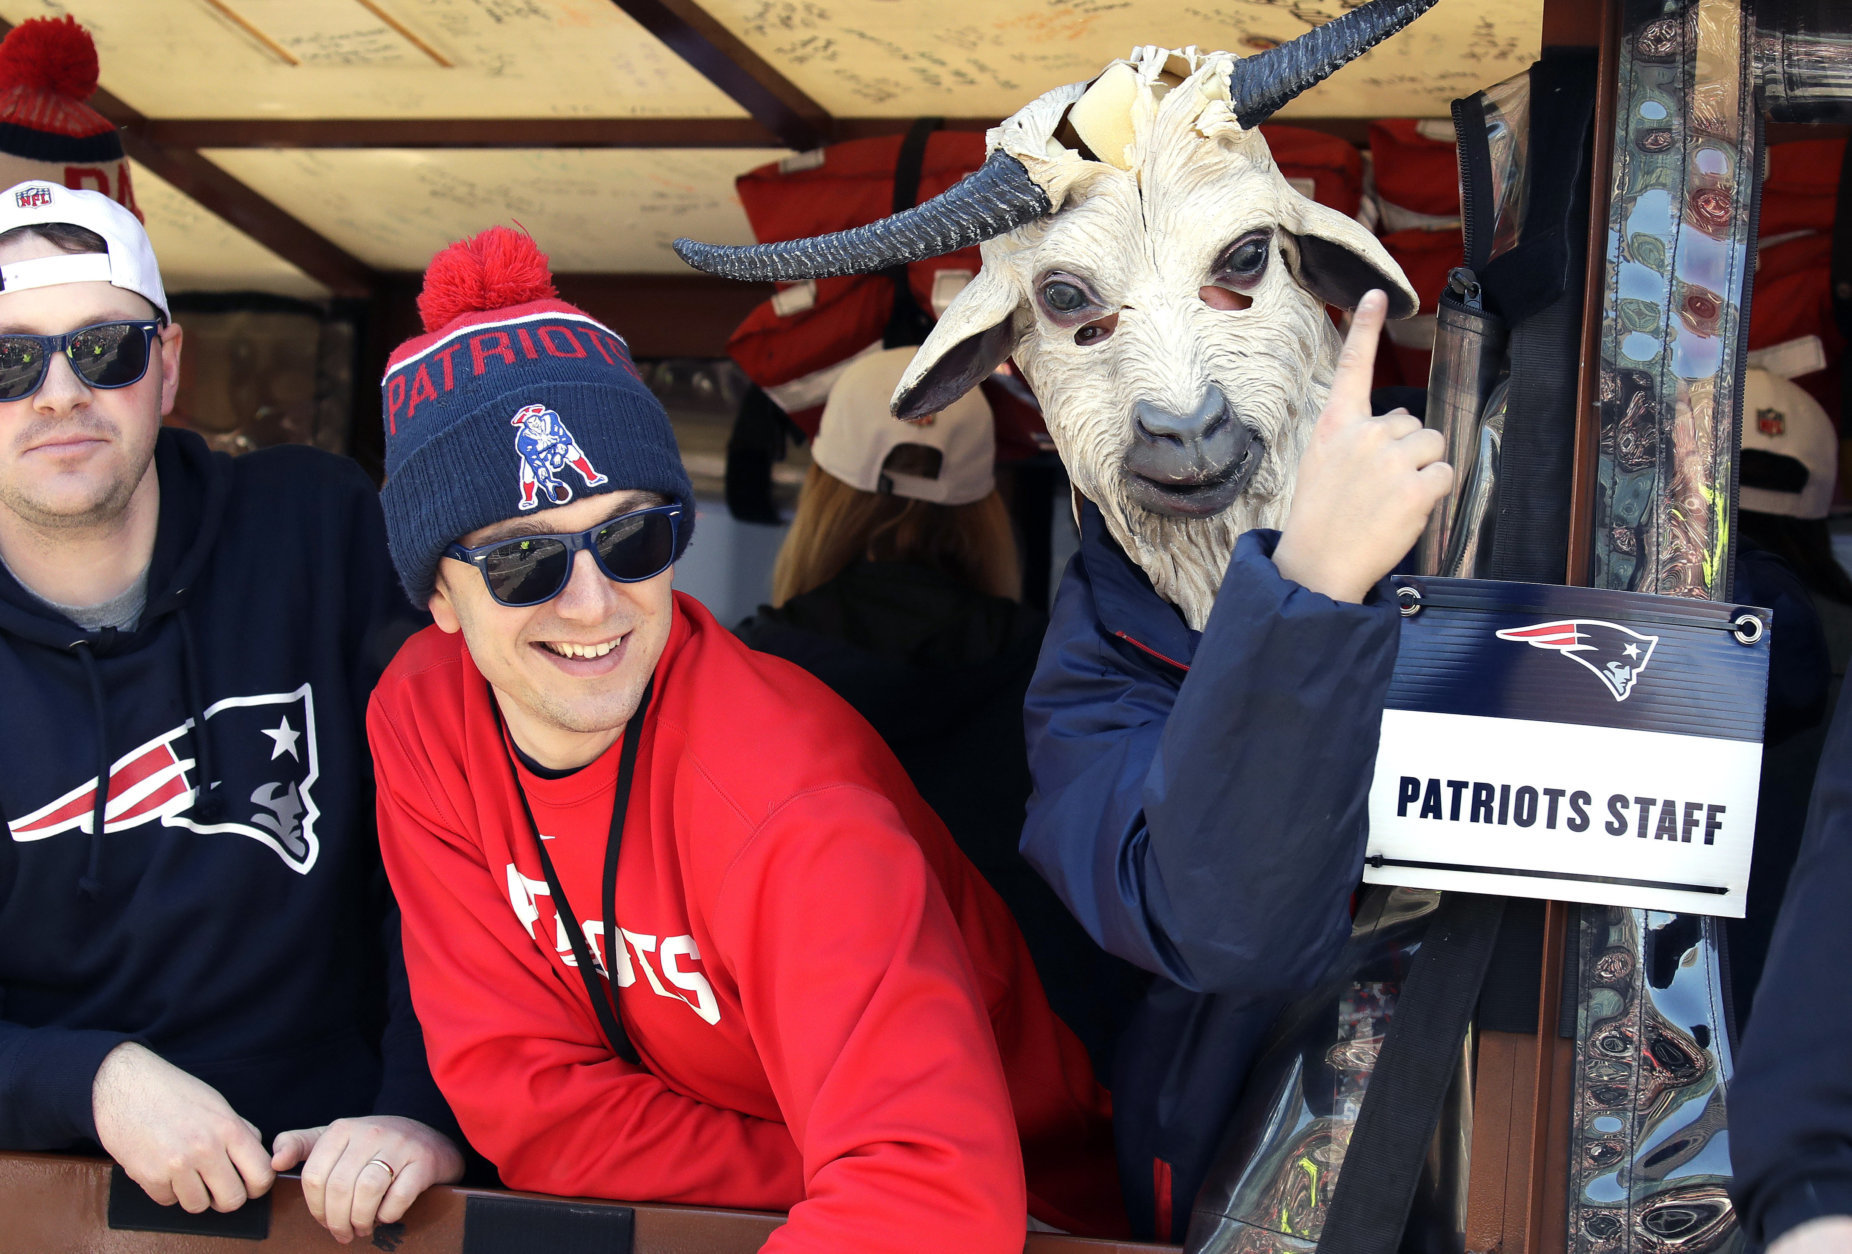 A member of the New England Patriots staff wears a goat mask during a victory parade through downtown Boston, Tuesday, Feb. 5, 2019, to celebrate their win over the Los Angeles Rams in Sunday's NFL Super Bowl 53 football game in Atlanta. The Patriots have won six Super Bowl championships. (AP Photo/Elise Amendola)